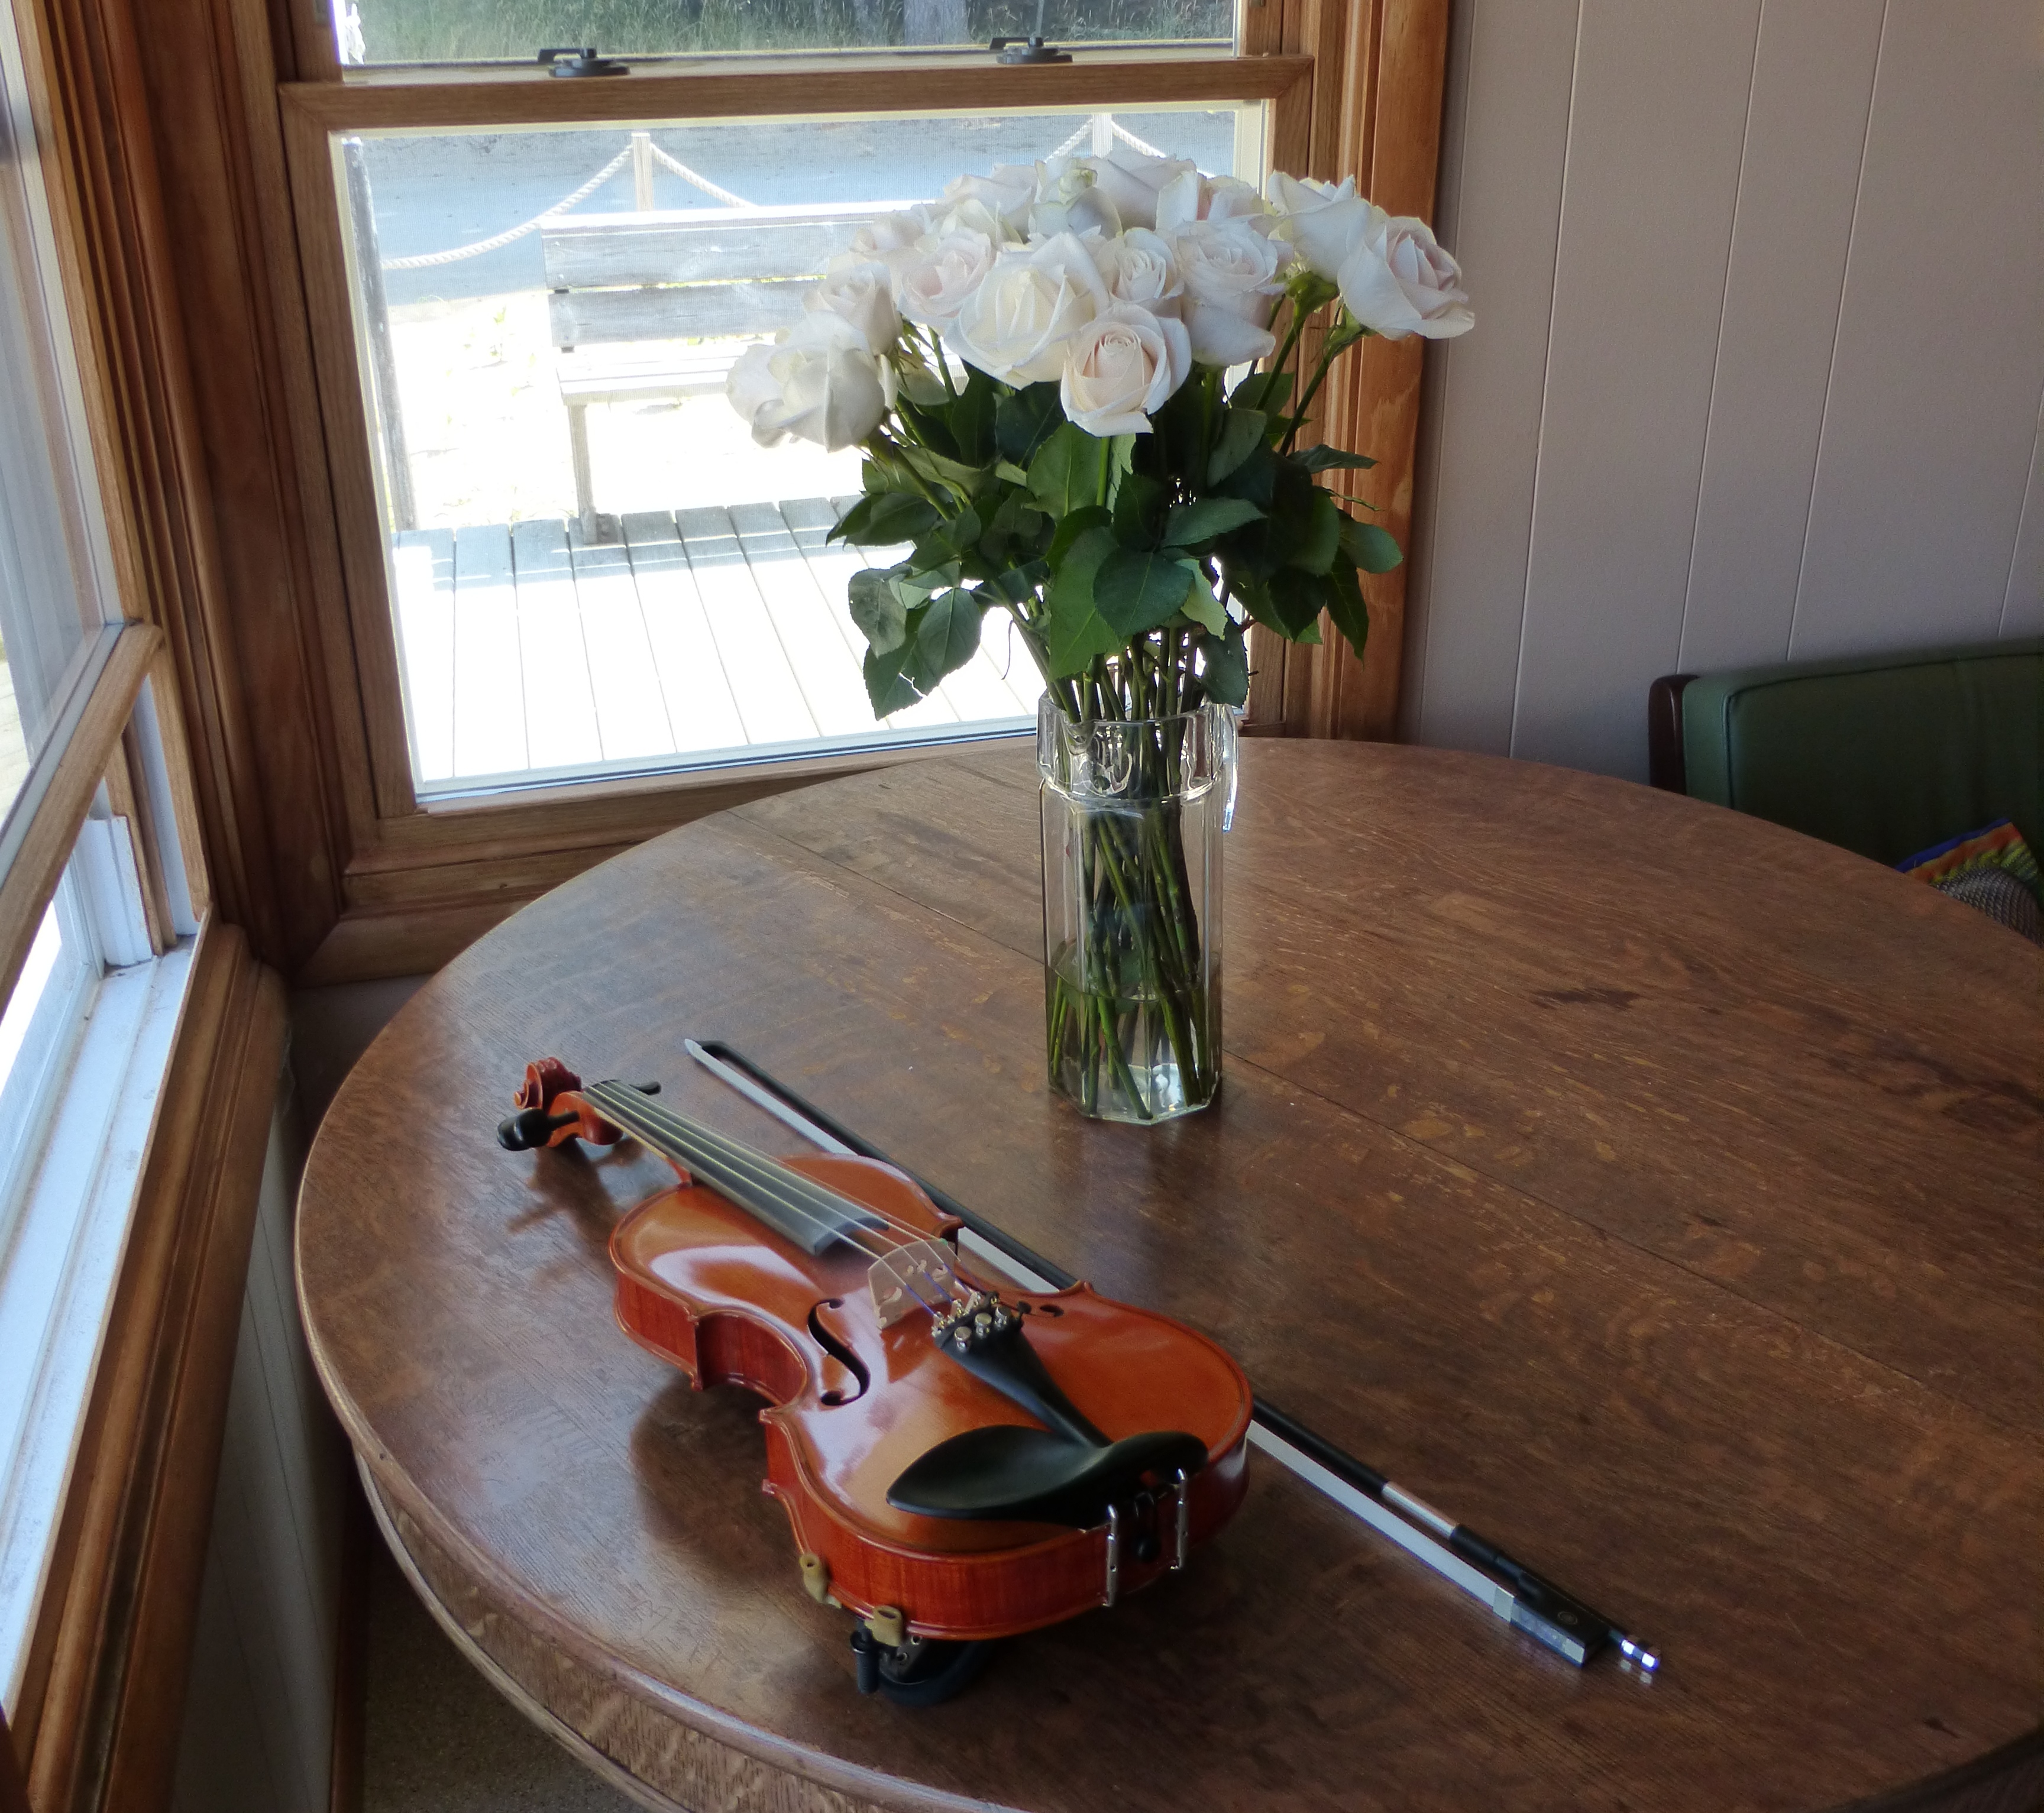 Clare's violin awaits the piece she played for her grandmother